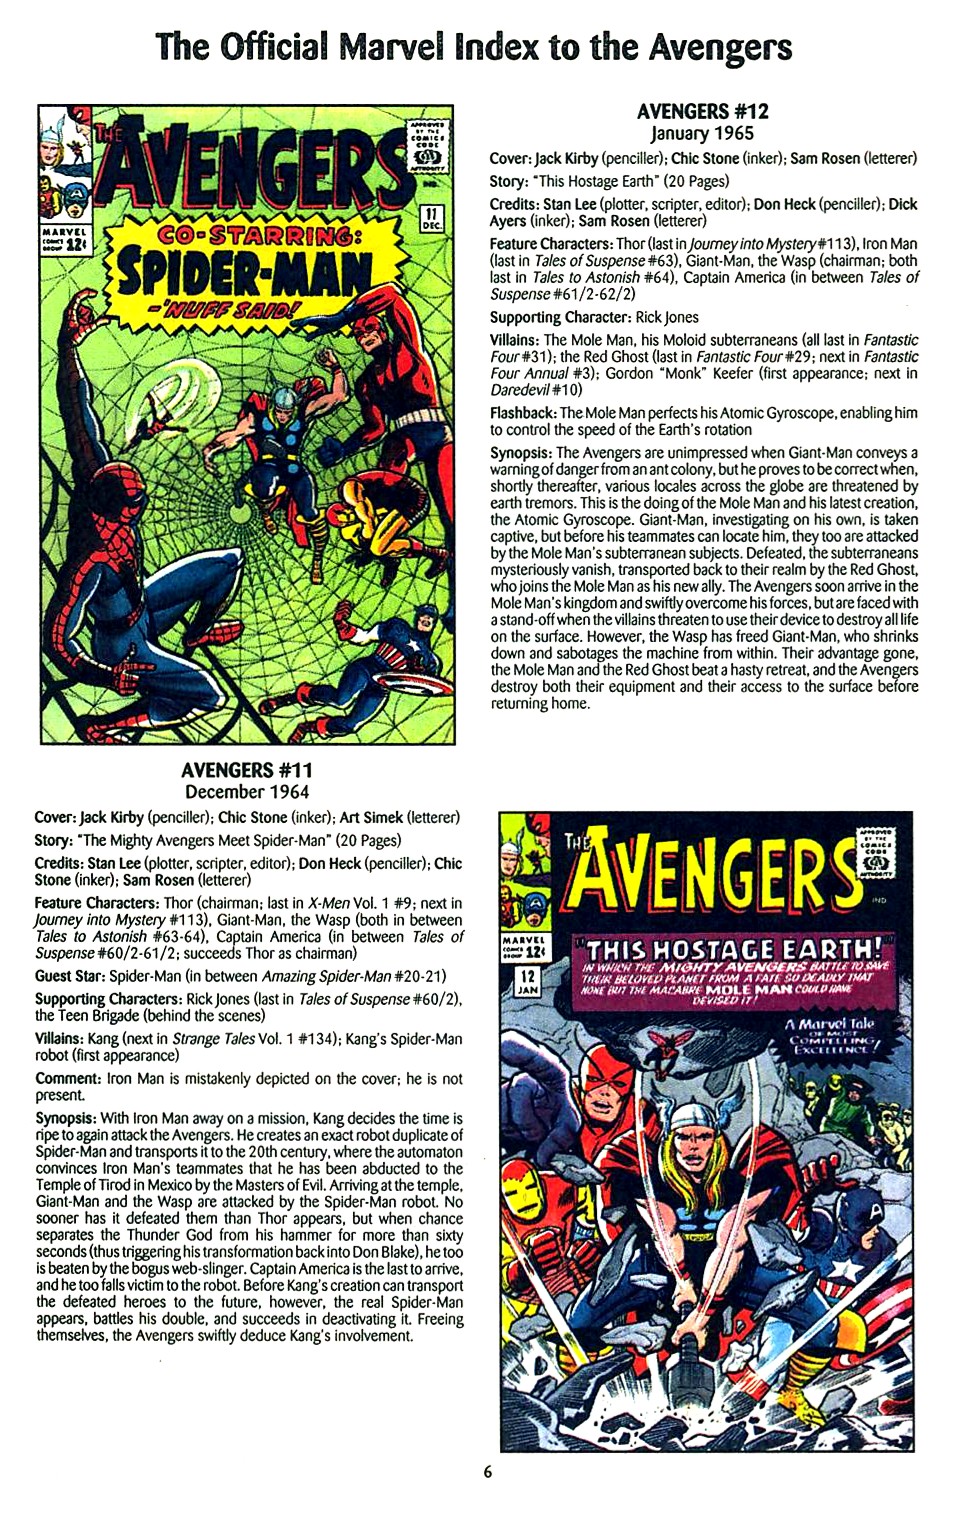 Read online The Official Marvel Index to the Avengers comic -  Issue #1 - 8